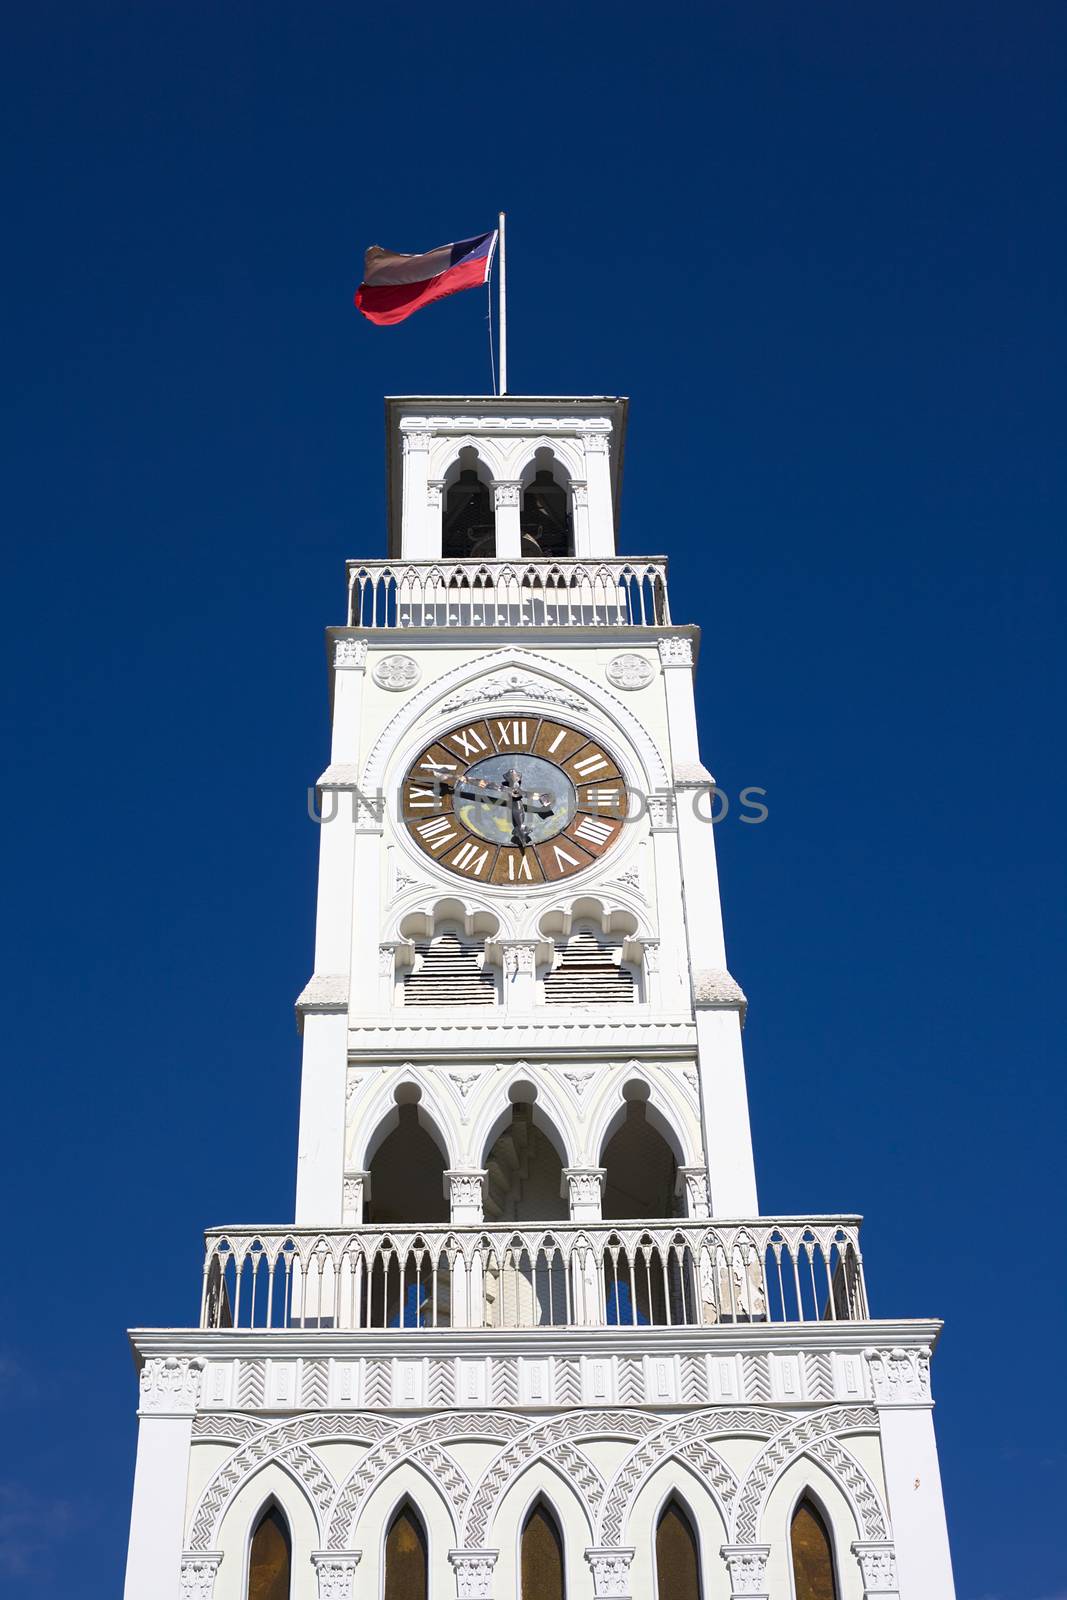 IQUIQUE, CHILE - JANUARY 22, 2015: The Torre Reloj (clock tower) from the year 1877 on Plaza Prat main square on January 22, 2015 in Iquique, Chile. Iquique is a free port city in Northern Chile. 